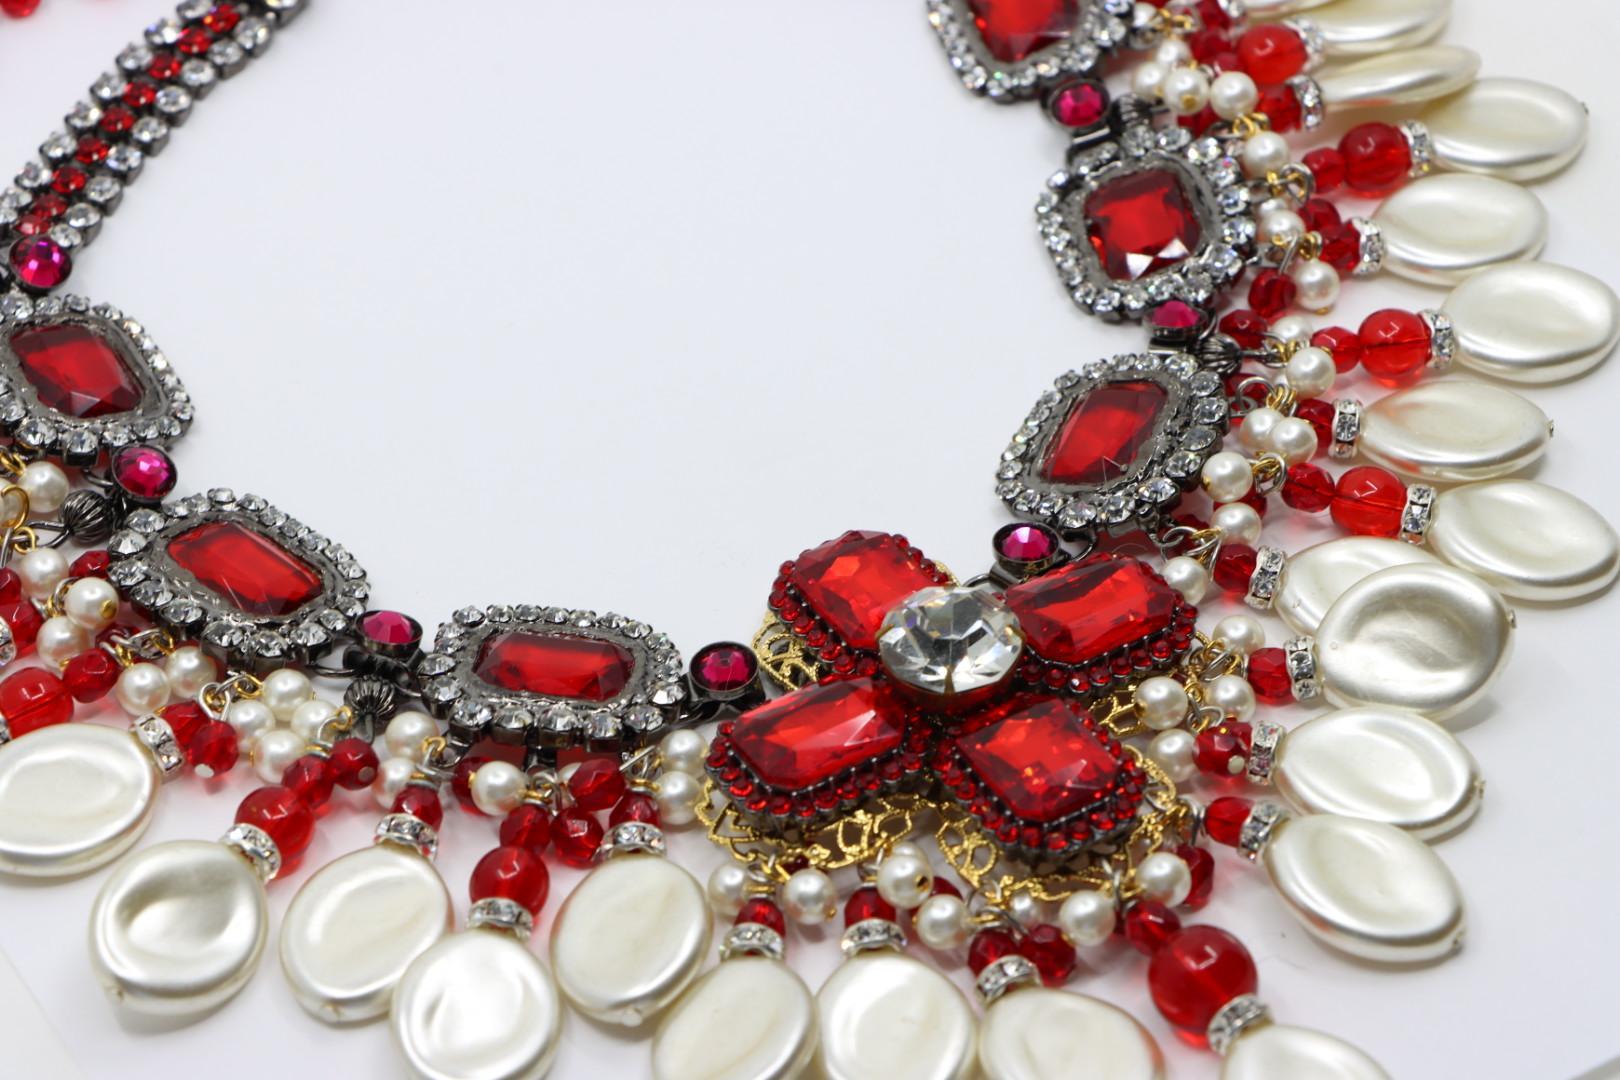 Rare Lawrence Vrba Red Rhinestone Faux Baroque Pearl Necklace & Earrings Parure For Sale 3